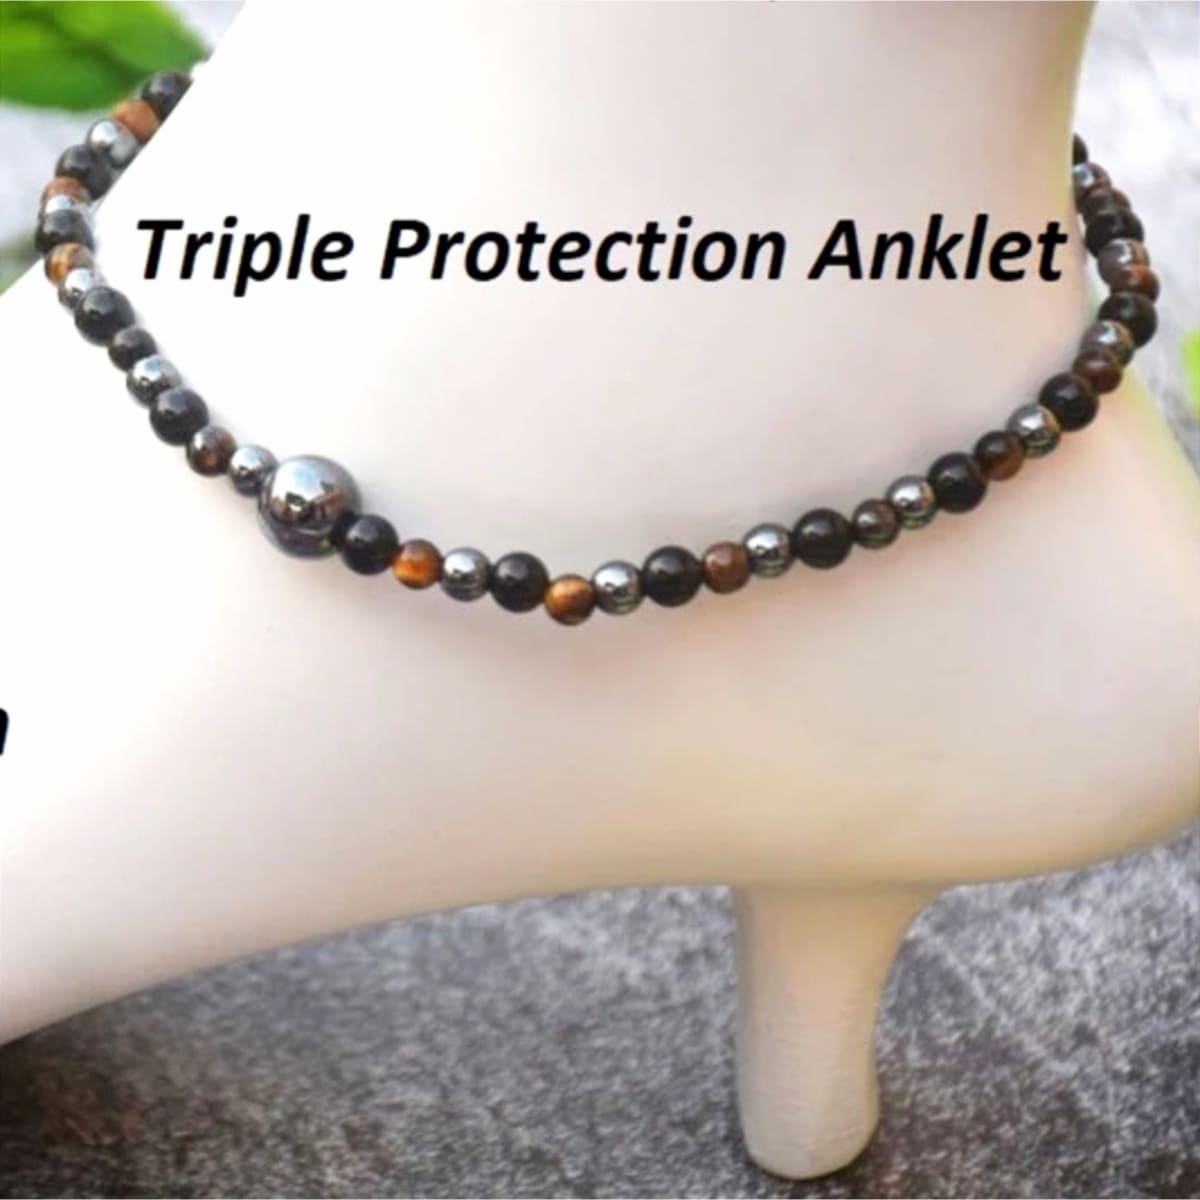 Triple Protection Anklet